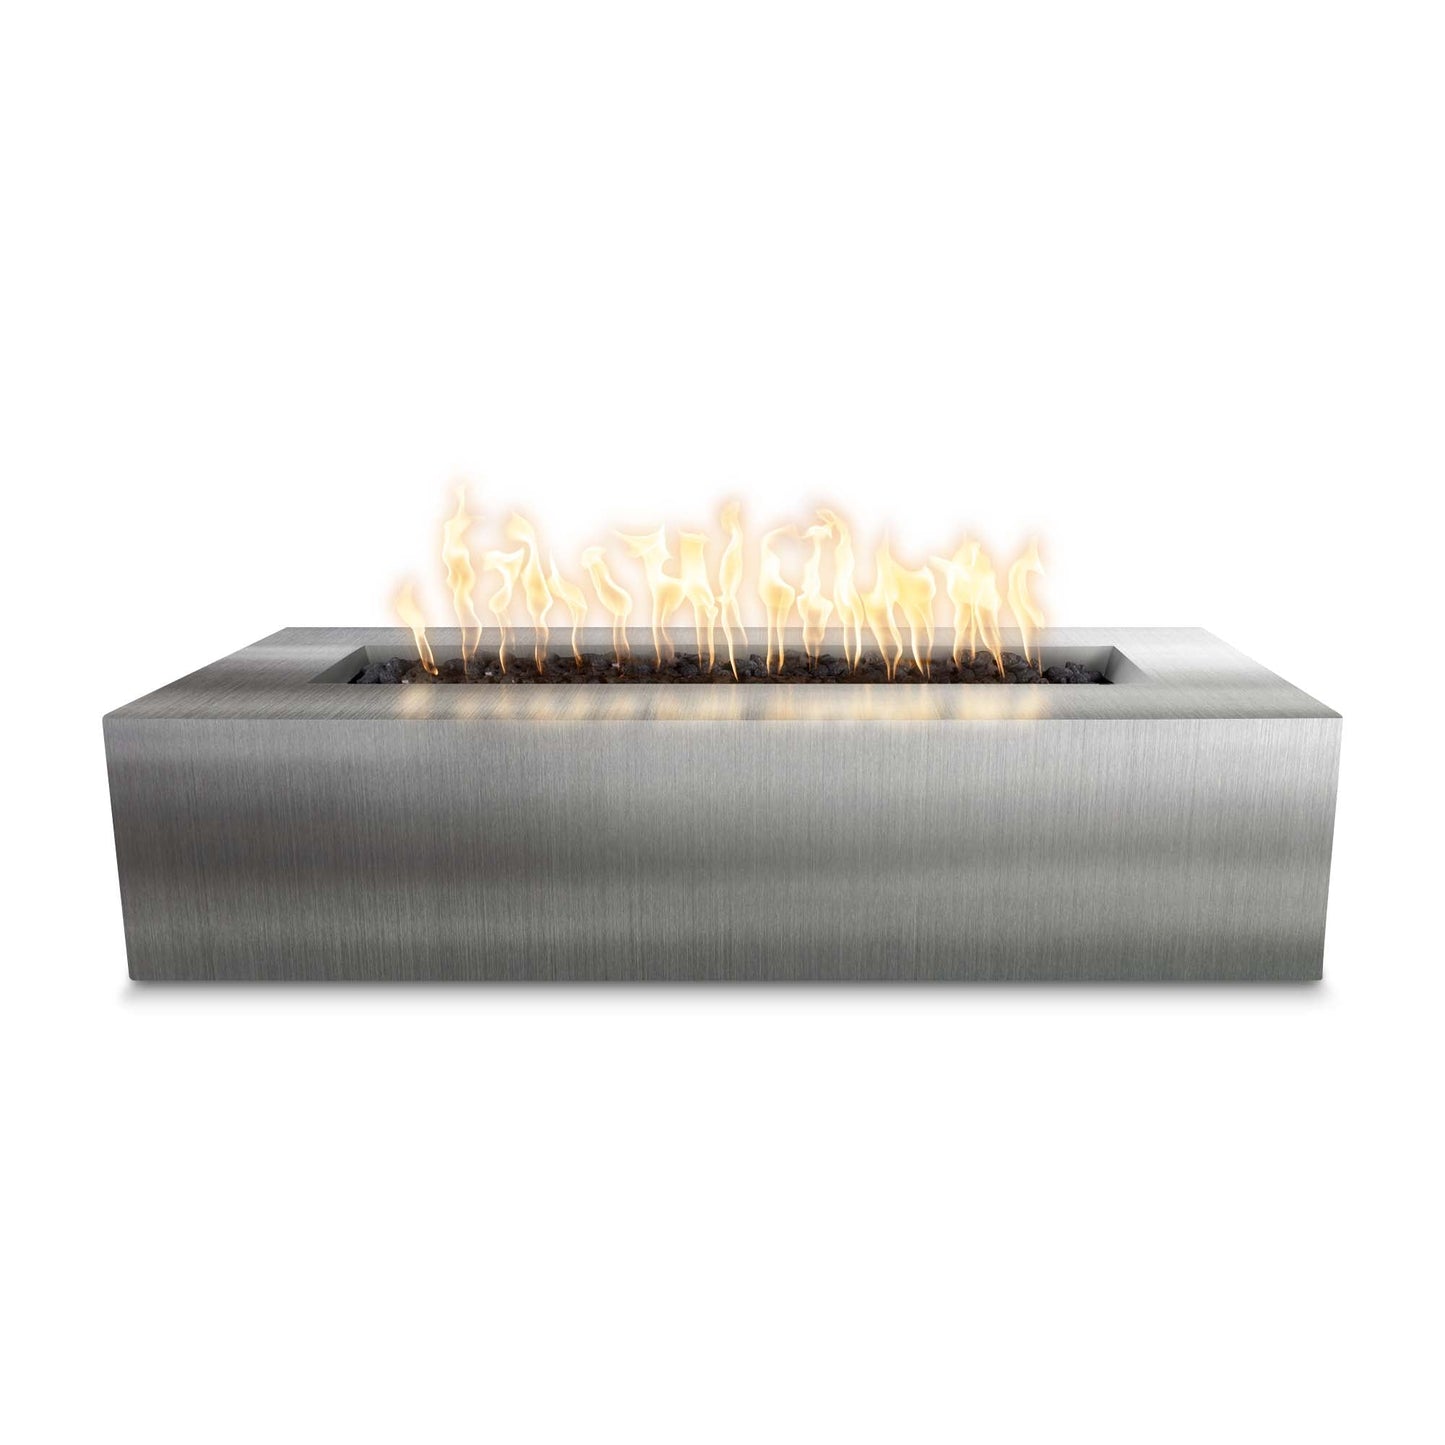 The Outdoor Plus Rectangular Regal 54" Hammered Copper Liquid Propane Fire Pit with Match Lit with Flame Sense Ignition